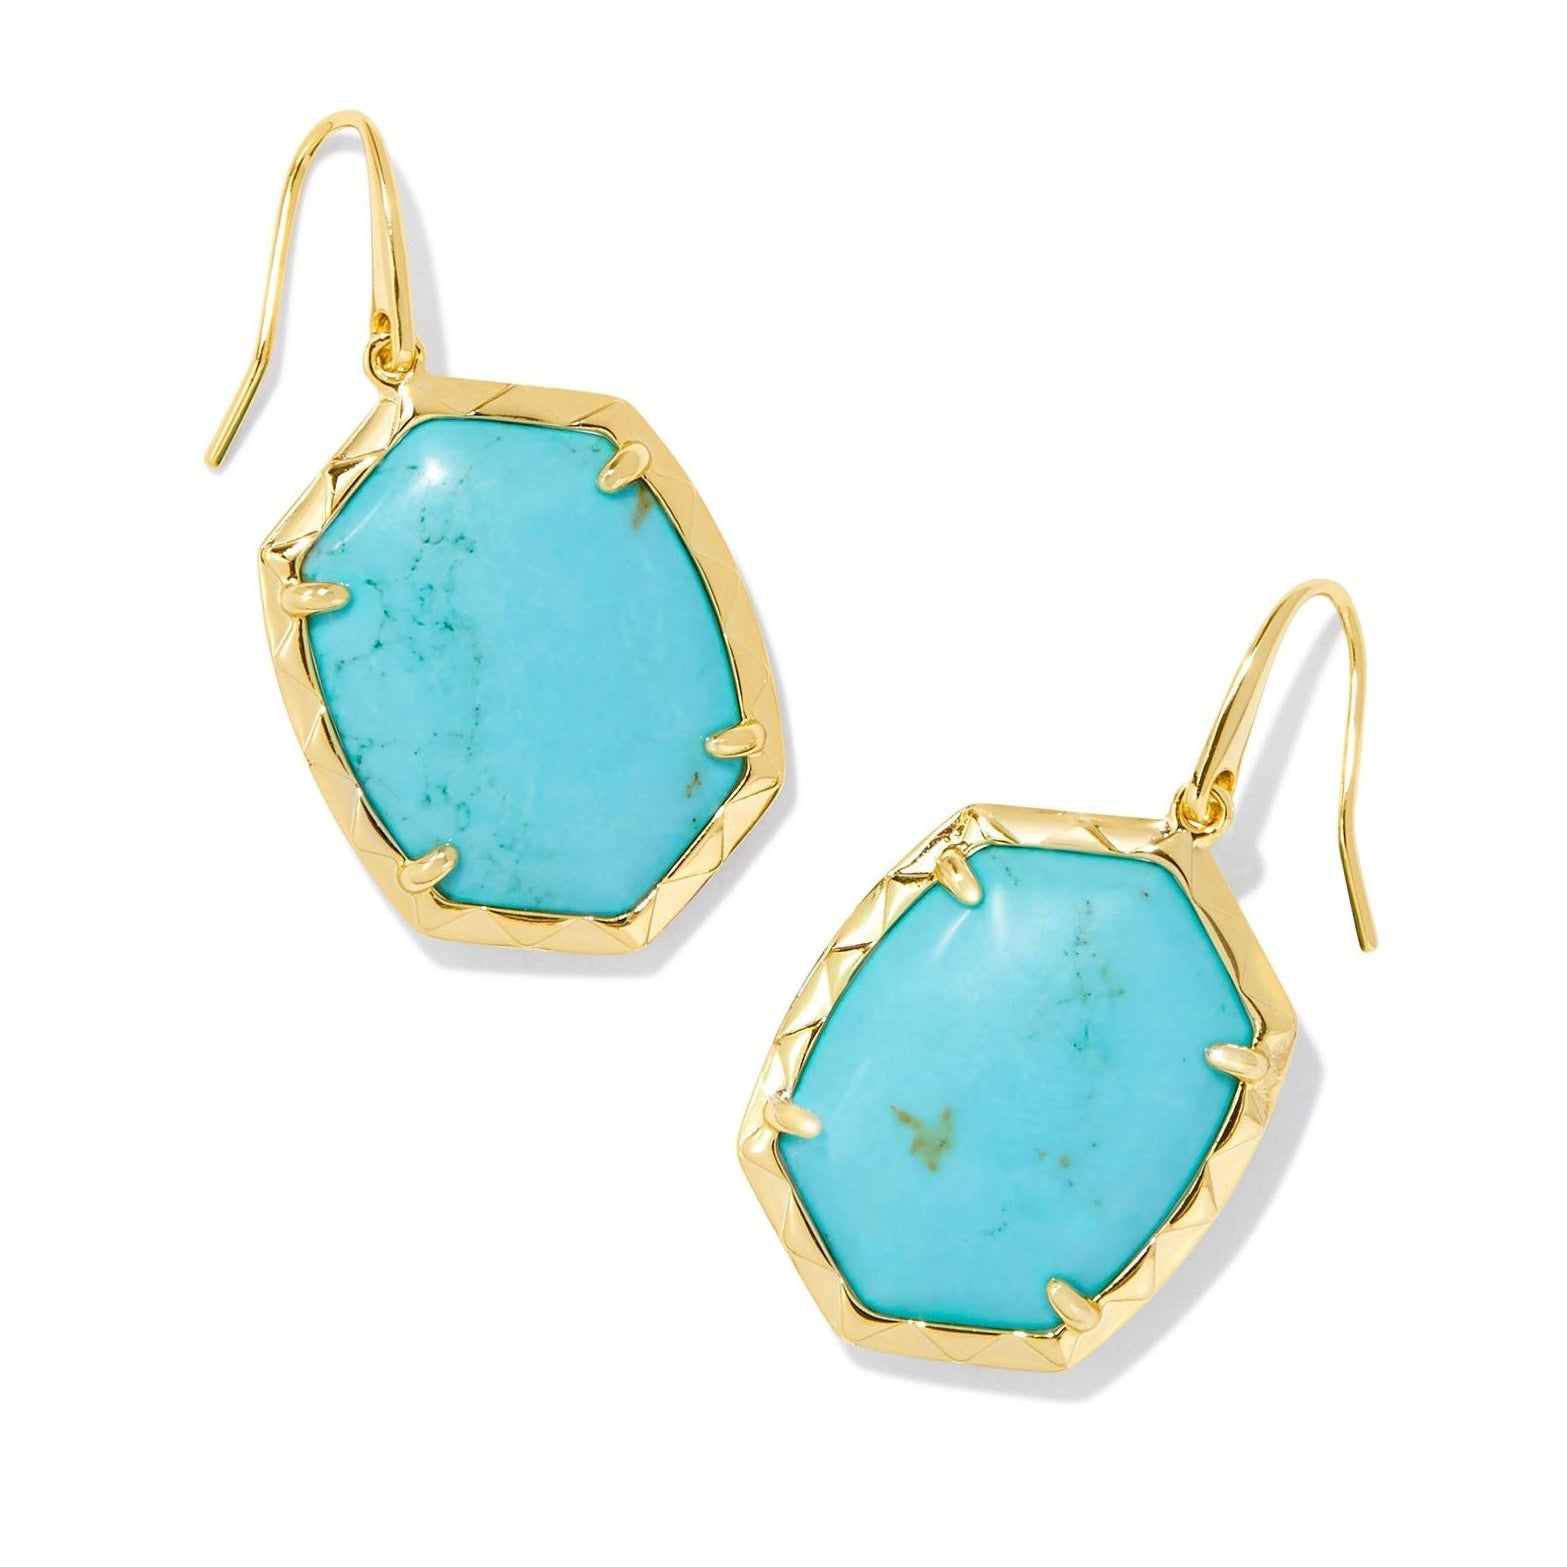 Kendra Scott | Daphne Gold Drop Earrings in Variegated Turquoise Magnesite - Giddy Up Glamour Boutique